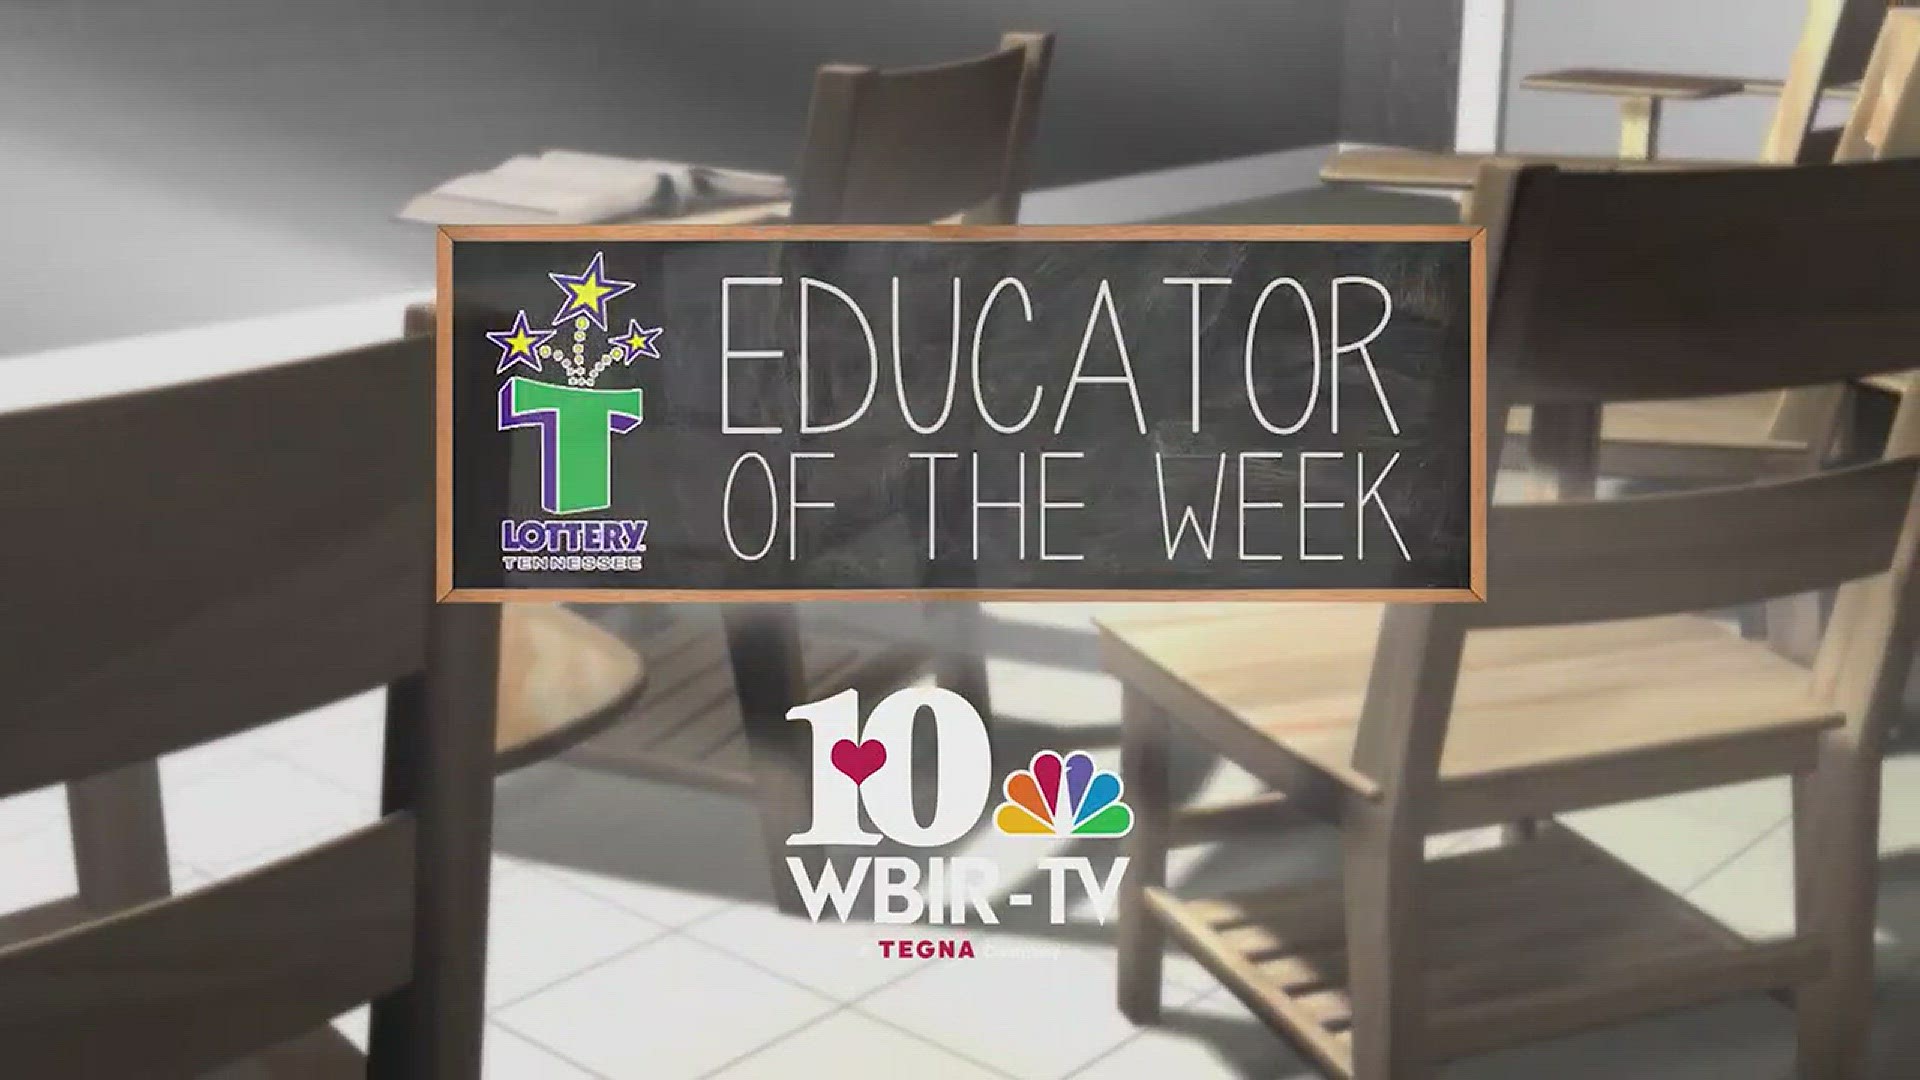 The educator of the week 5/1 is Leigh Wiley